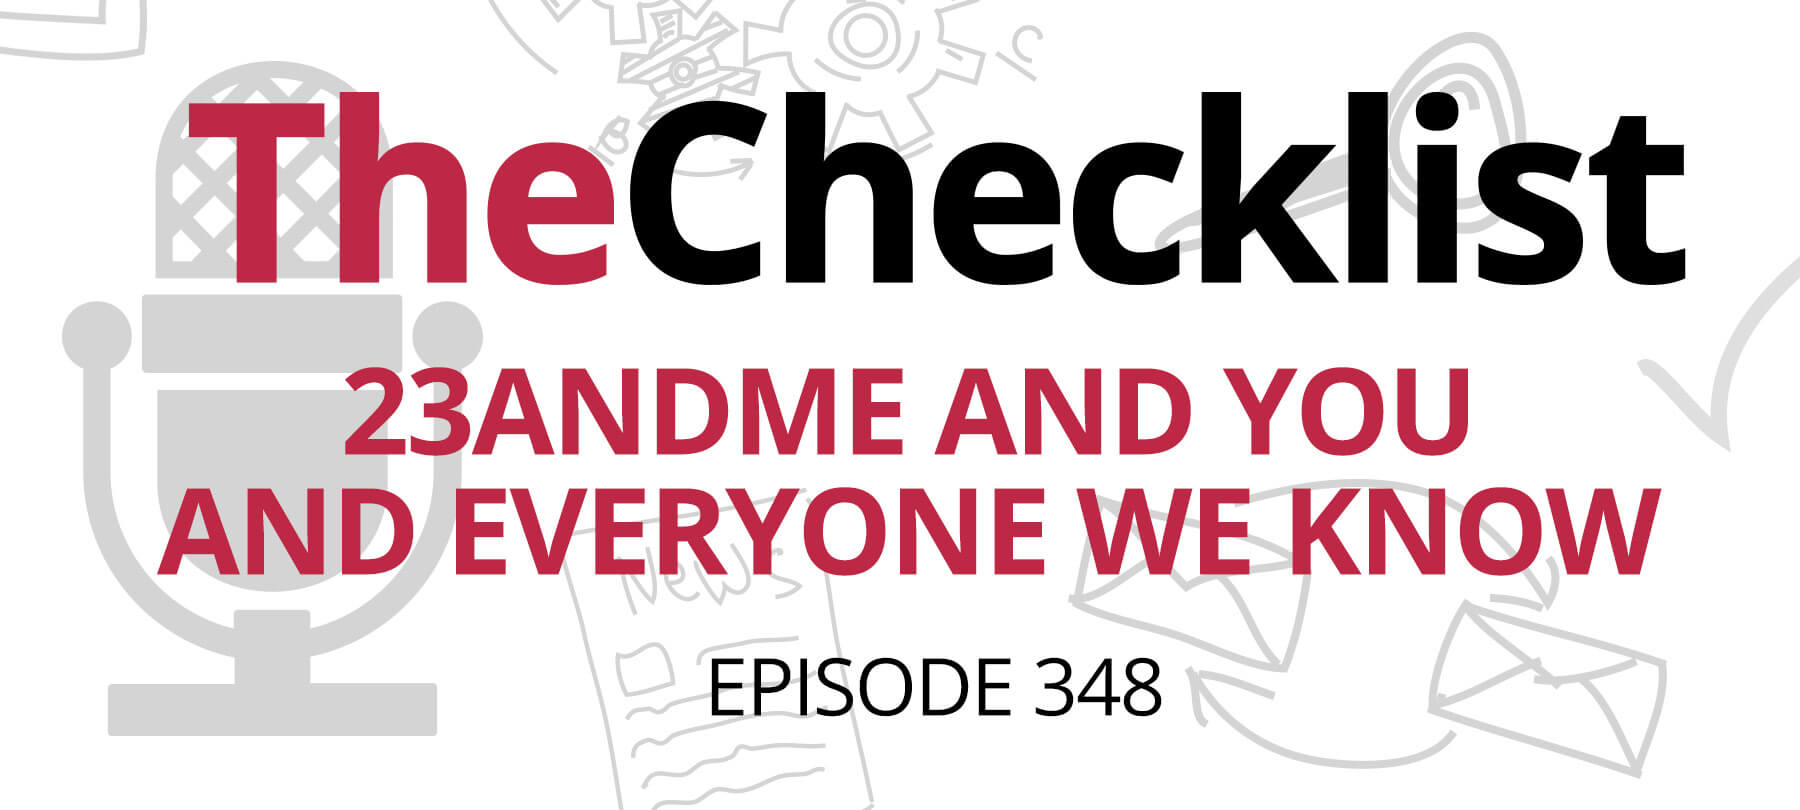 Checklist 428: 23andMe and you and everyone we know article image